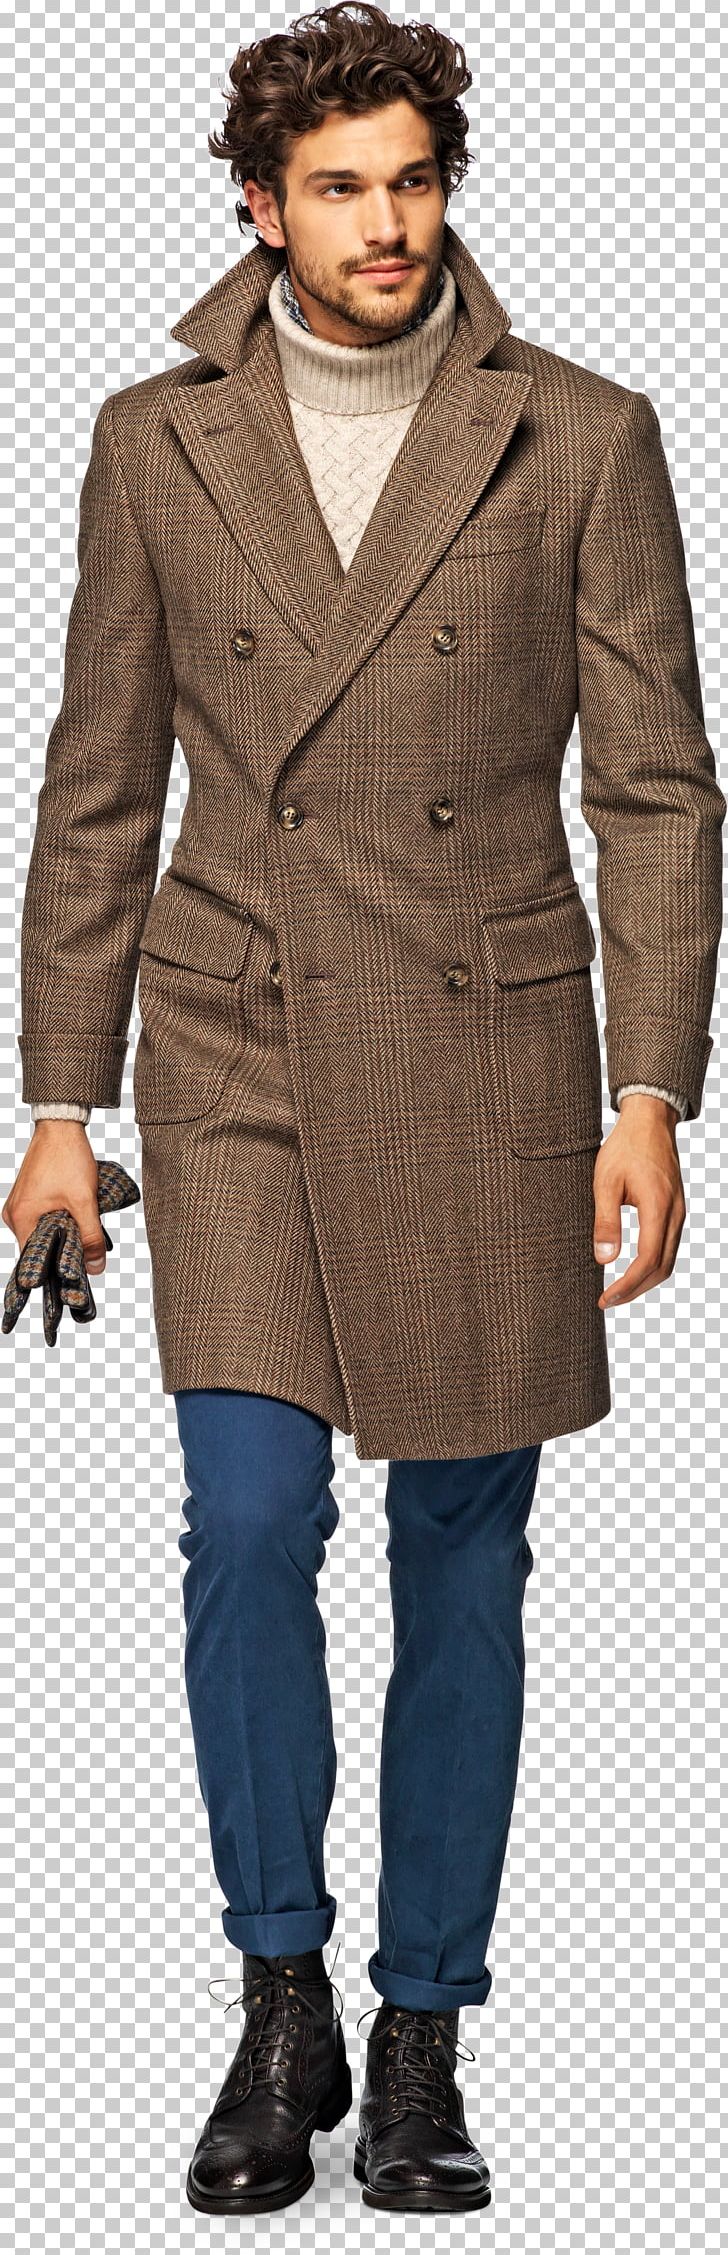 Overcoat Jacket Clothing Suitsupply PNG, Clipart, Clothing, Coat, Collar, Doublebreasted, Dress Free PNG Download